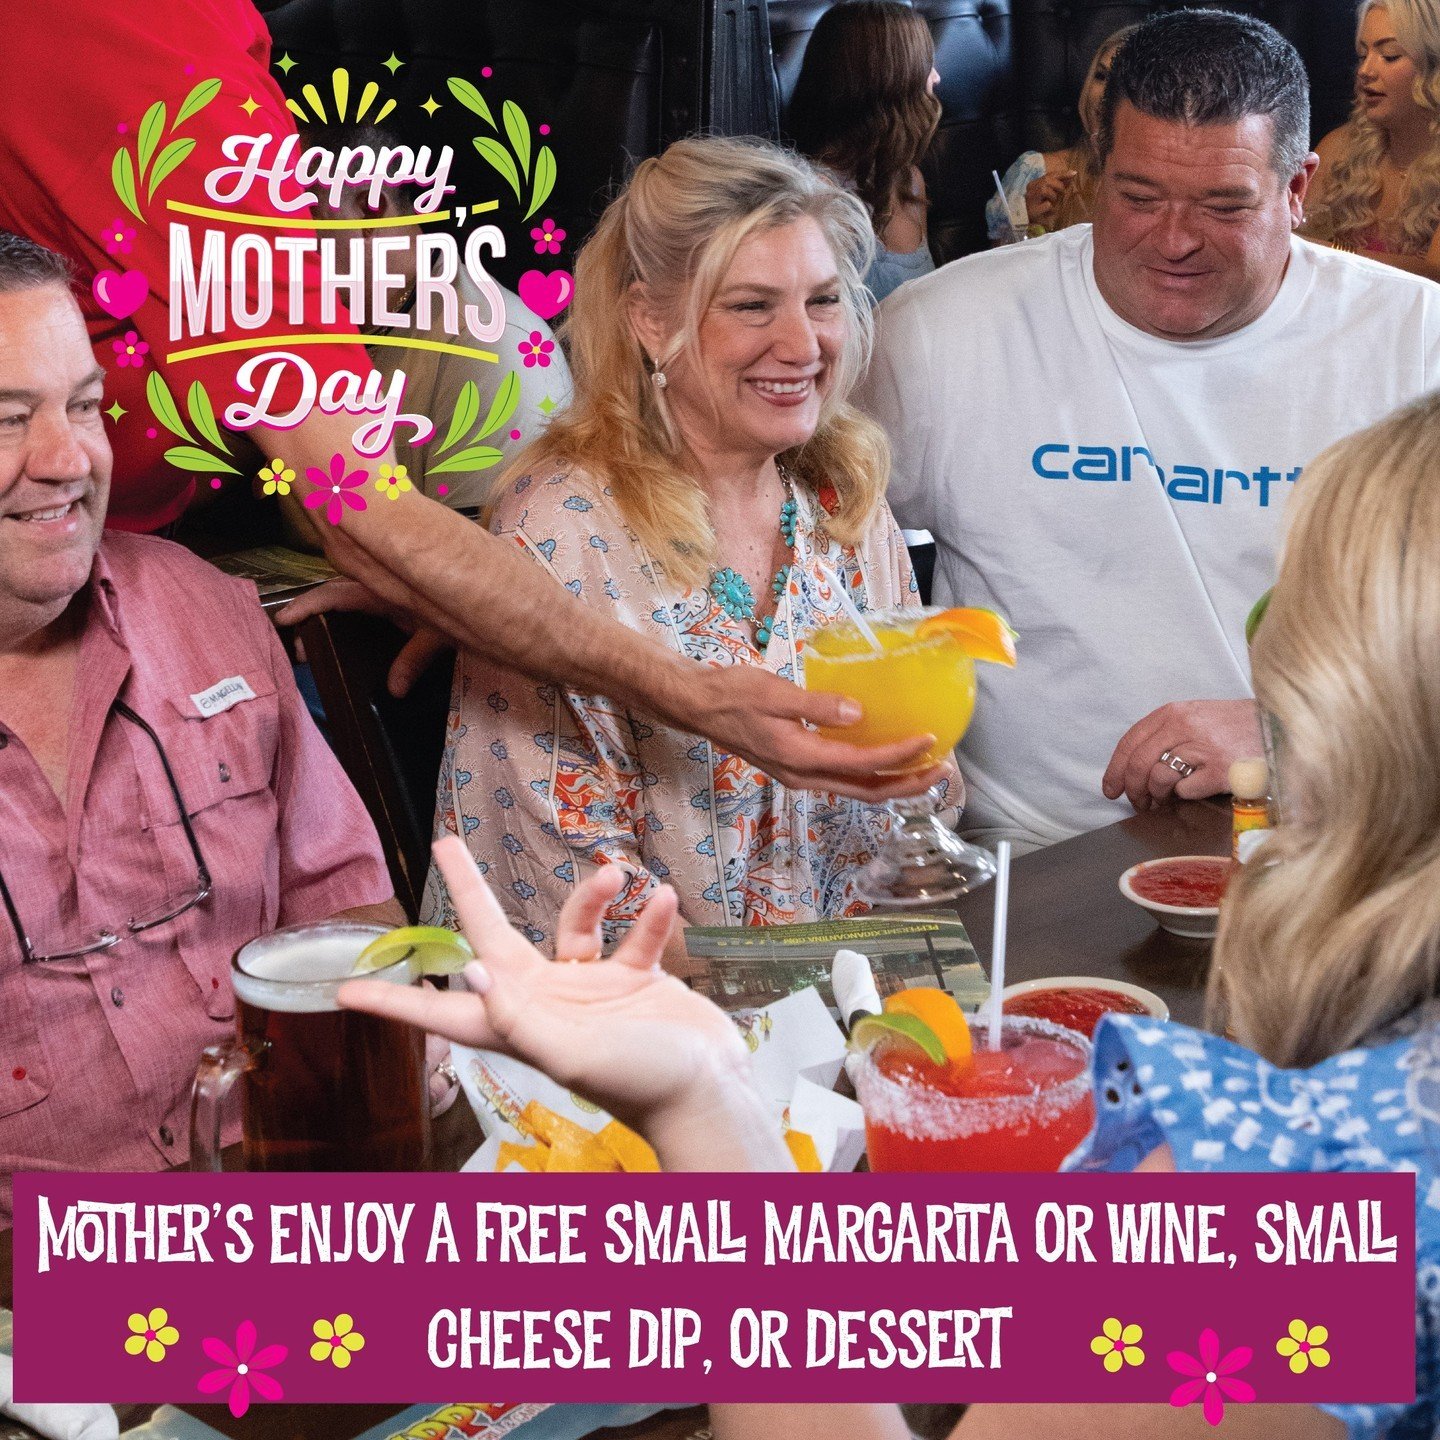 Come celebrate #MothersDay with us this Sunday and treat mom to a free item on us 💐 (See caption for details) 

Happy Mother&rsquo;s Day to our Pepper&rsquo;s familia! 🩷